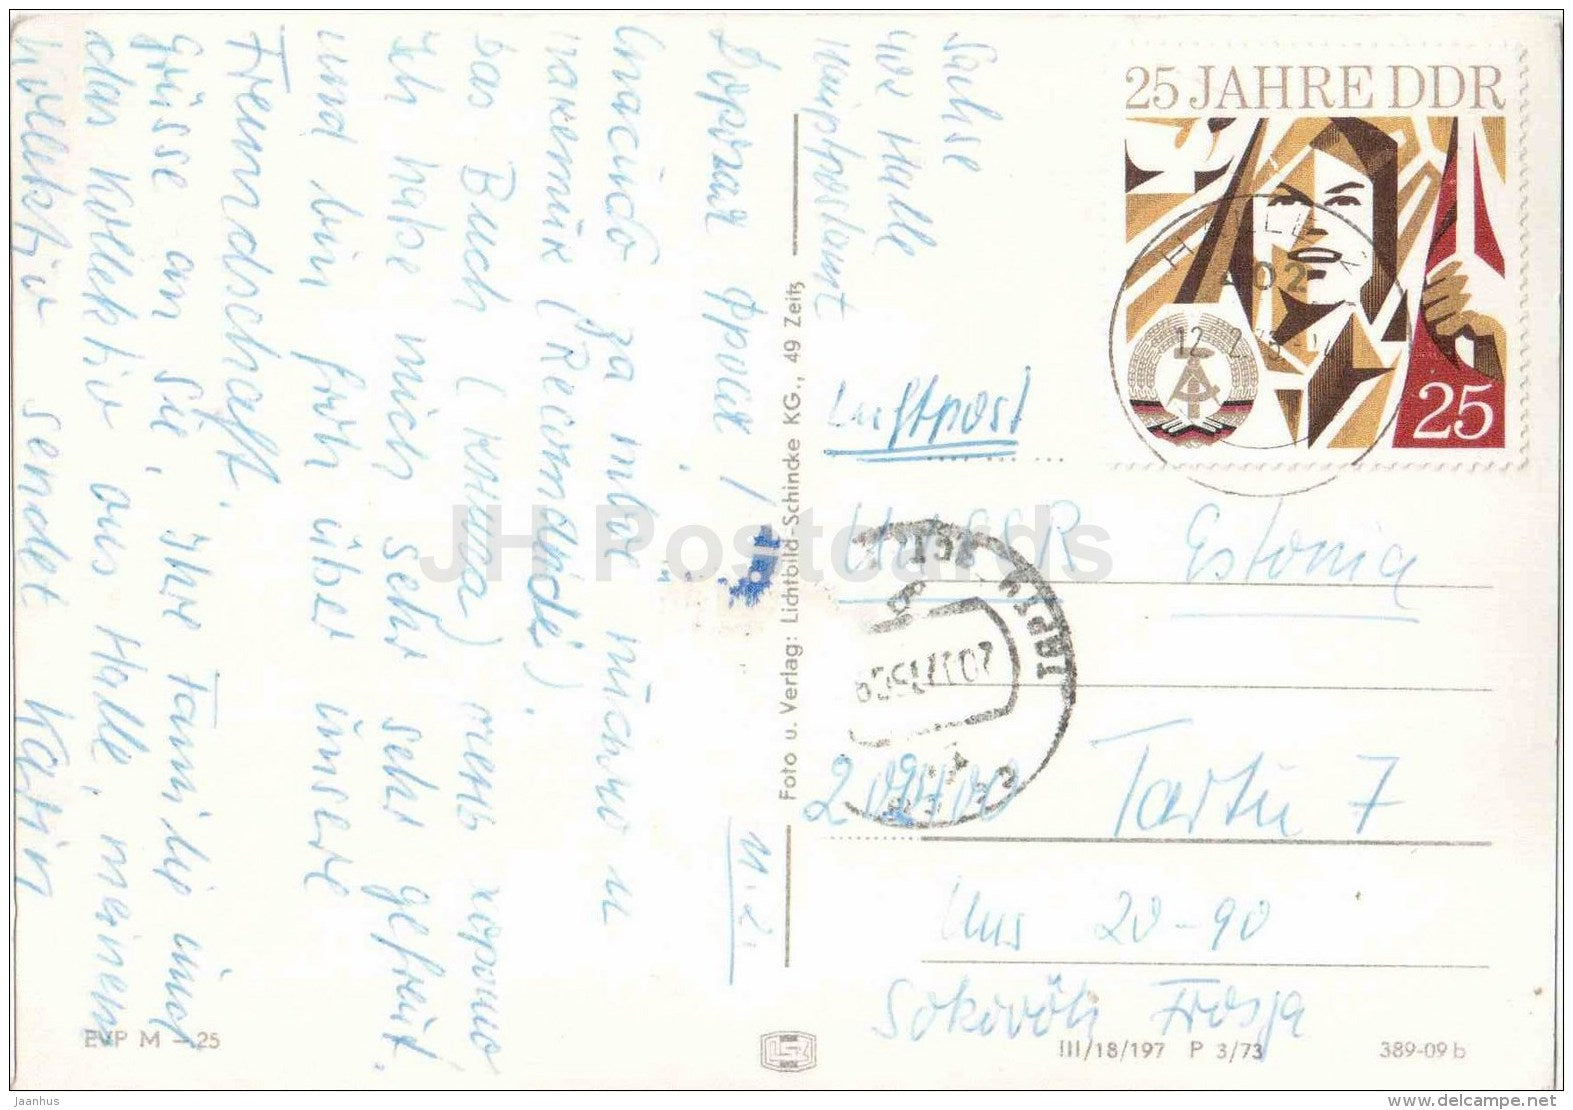 Postamt - post office - fountains - Halle - Saale - Germany - sent from Germany Halle to Estonia Tartu 1975 - JH Postcards